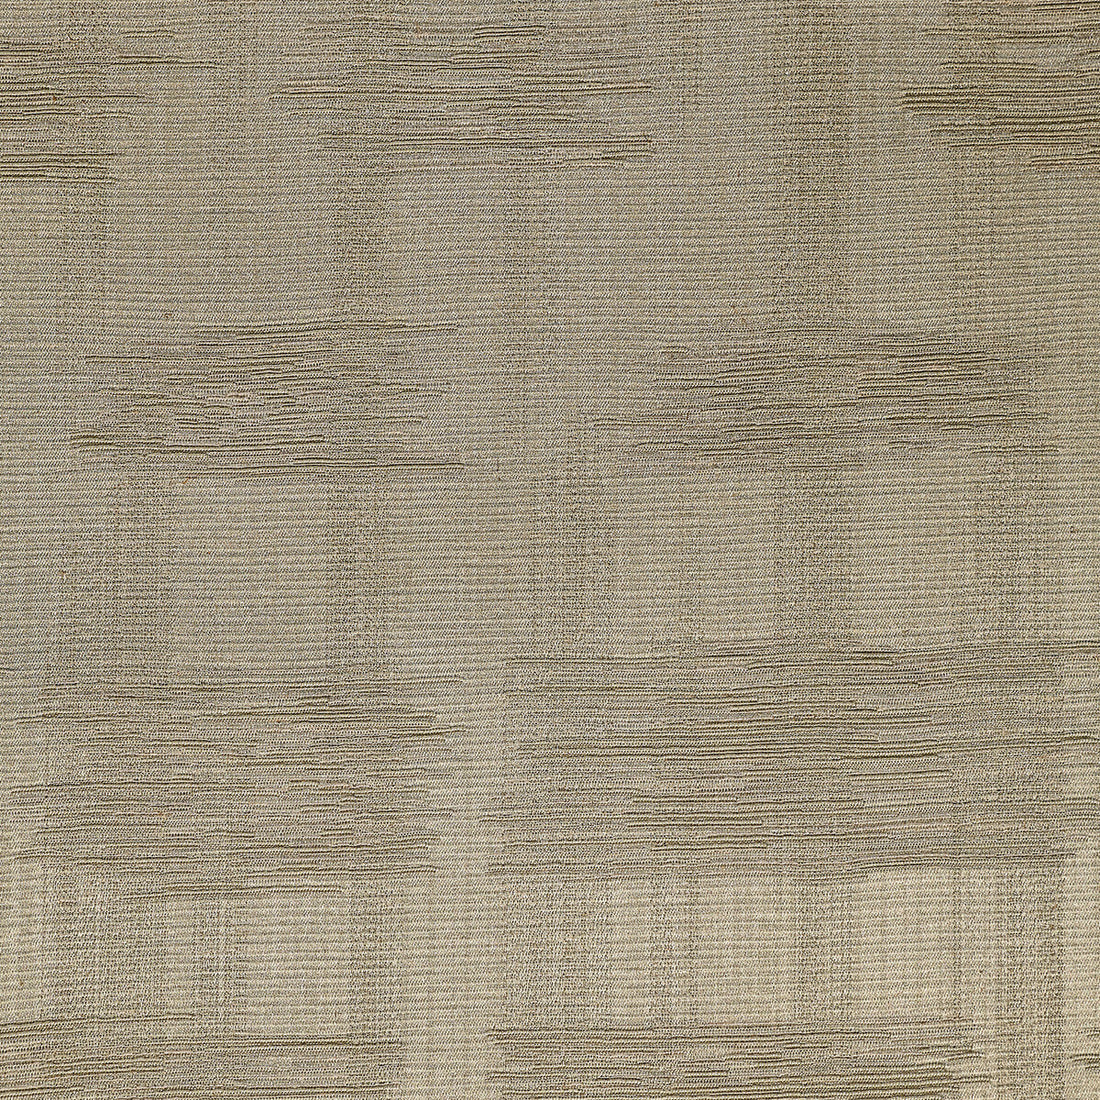 Maze fabric in 9 color - pattern LZ-30396.09.0 - by Kravet Design in the Lizzo collection